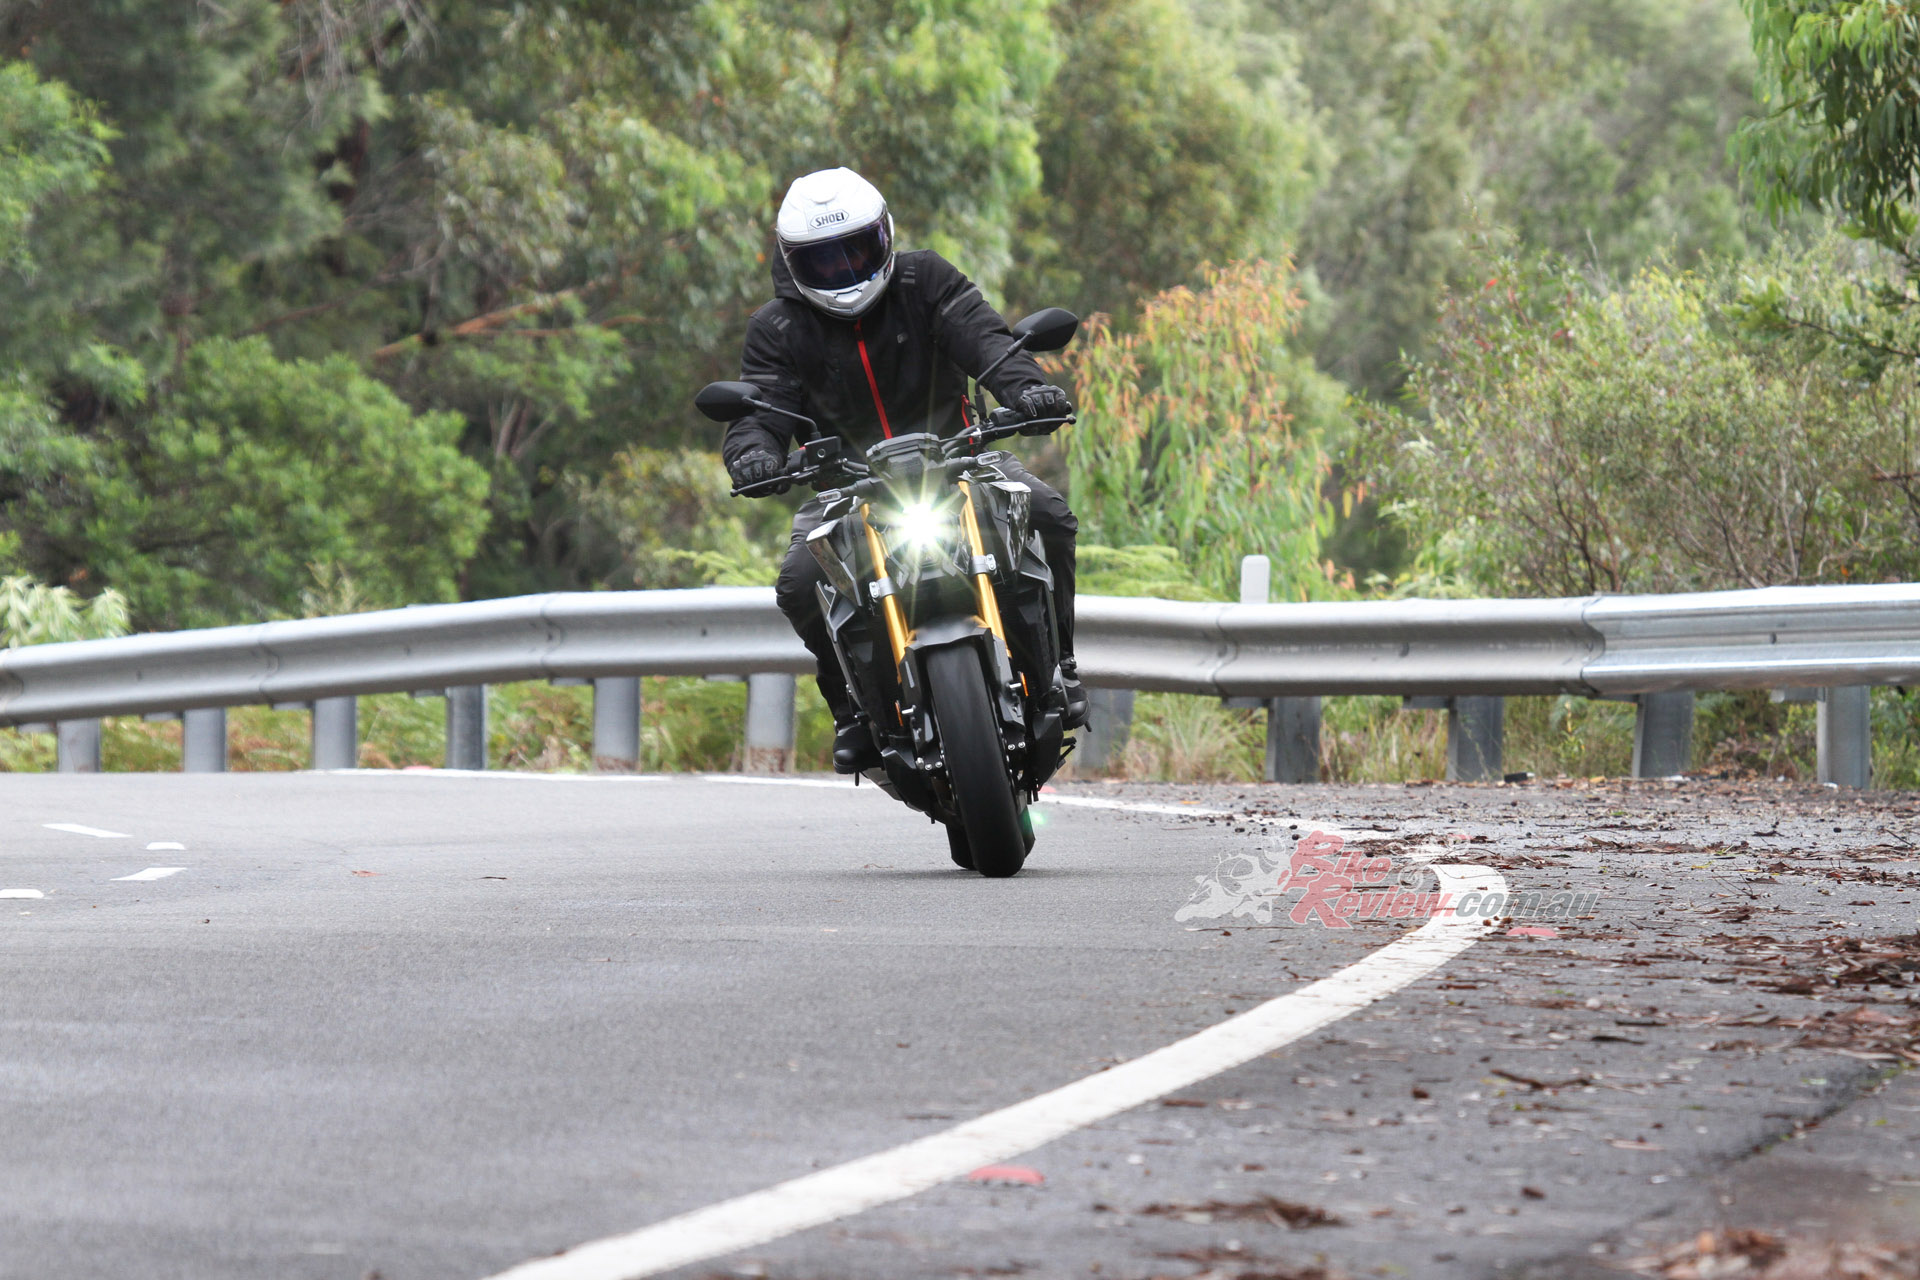 On damp and drying roads, such as above, the ABS and TC, as well as C or B Modes, really help keep such a powerful bike in check. 